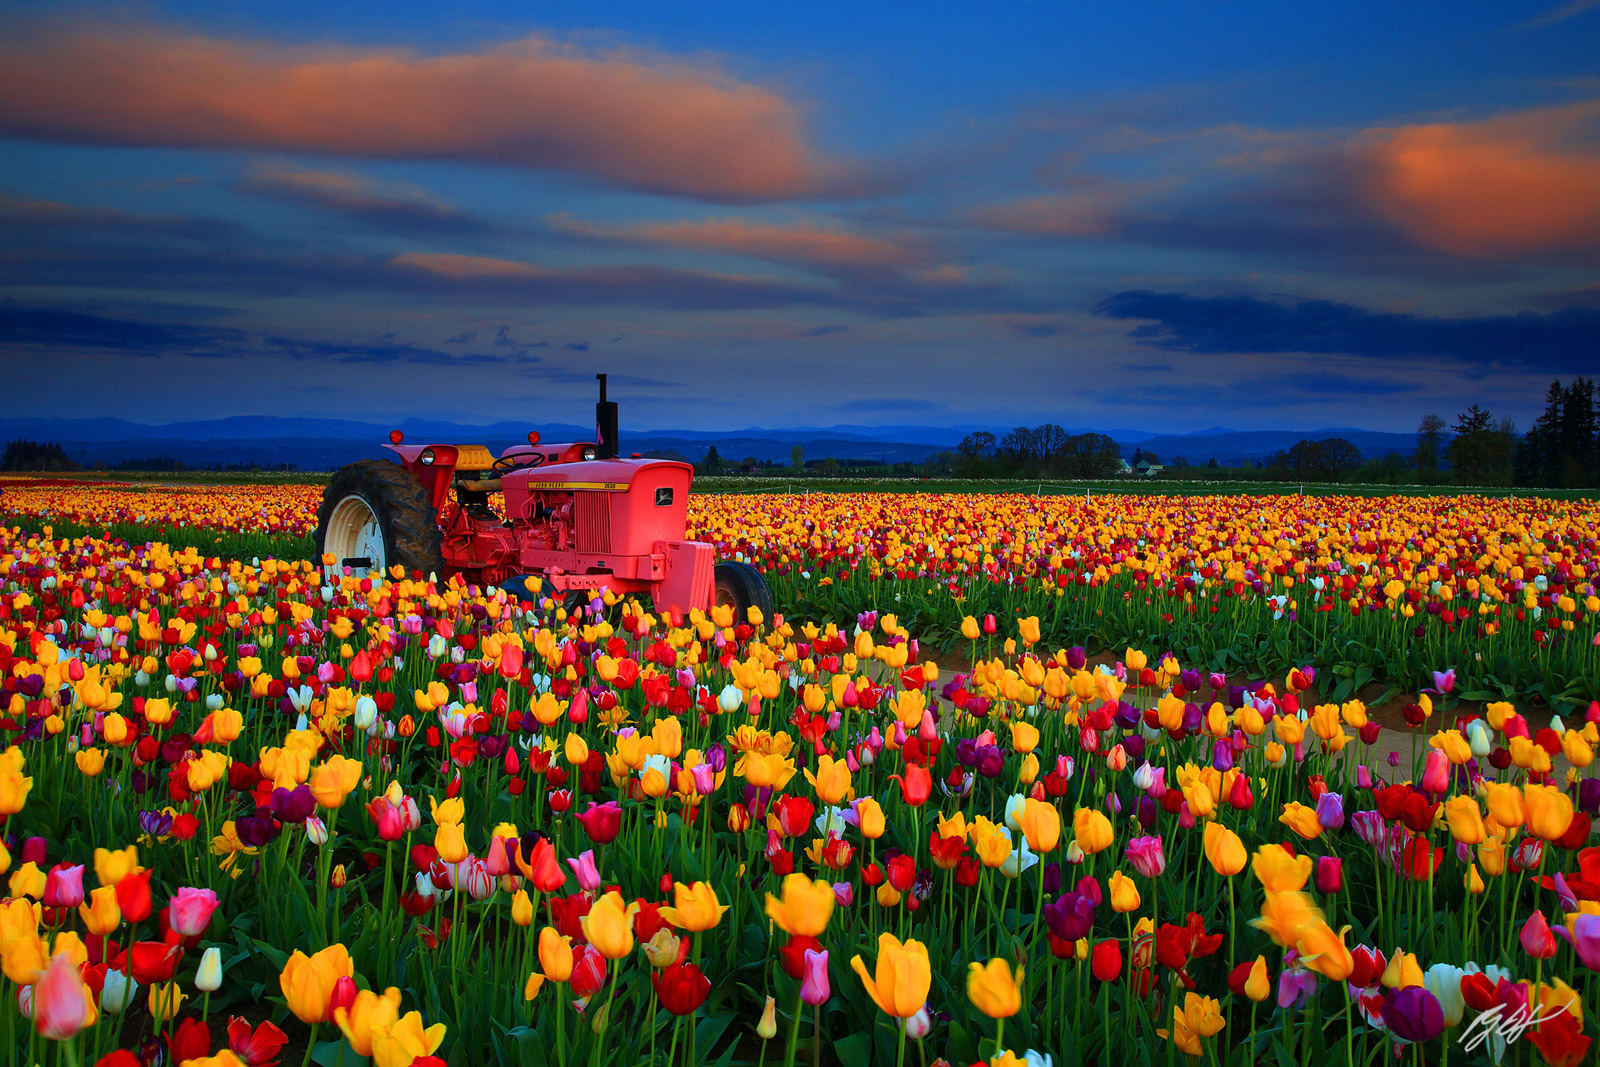 Tulips and Tractor at Sunset, Wooden-Shoe Tulip Farm, Woodburn Oregon